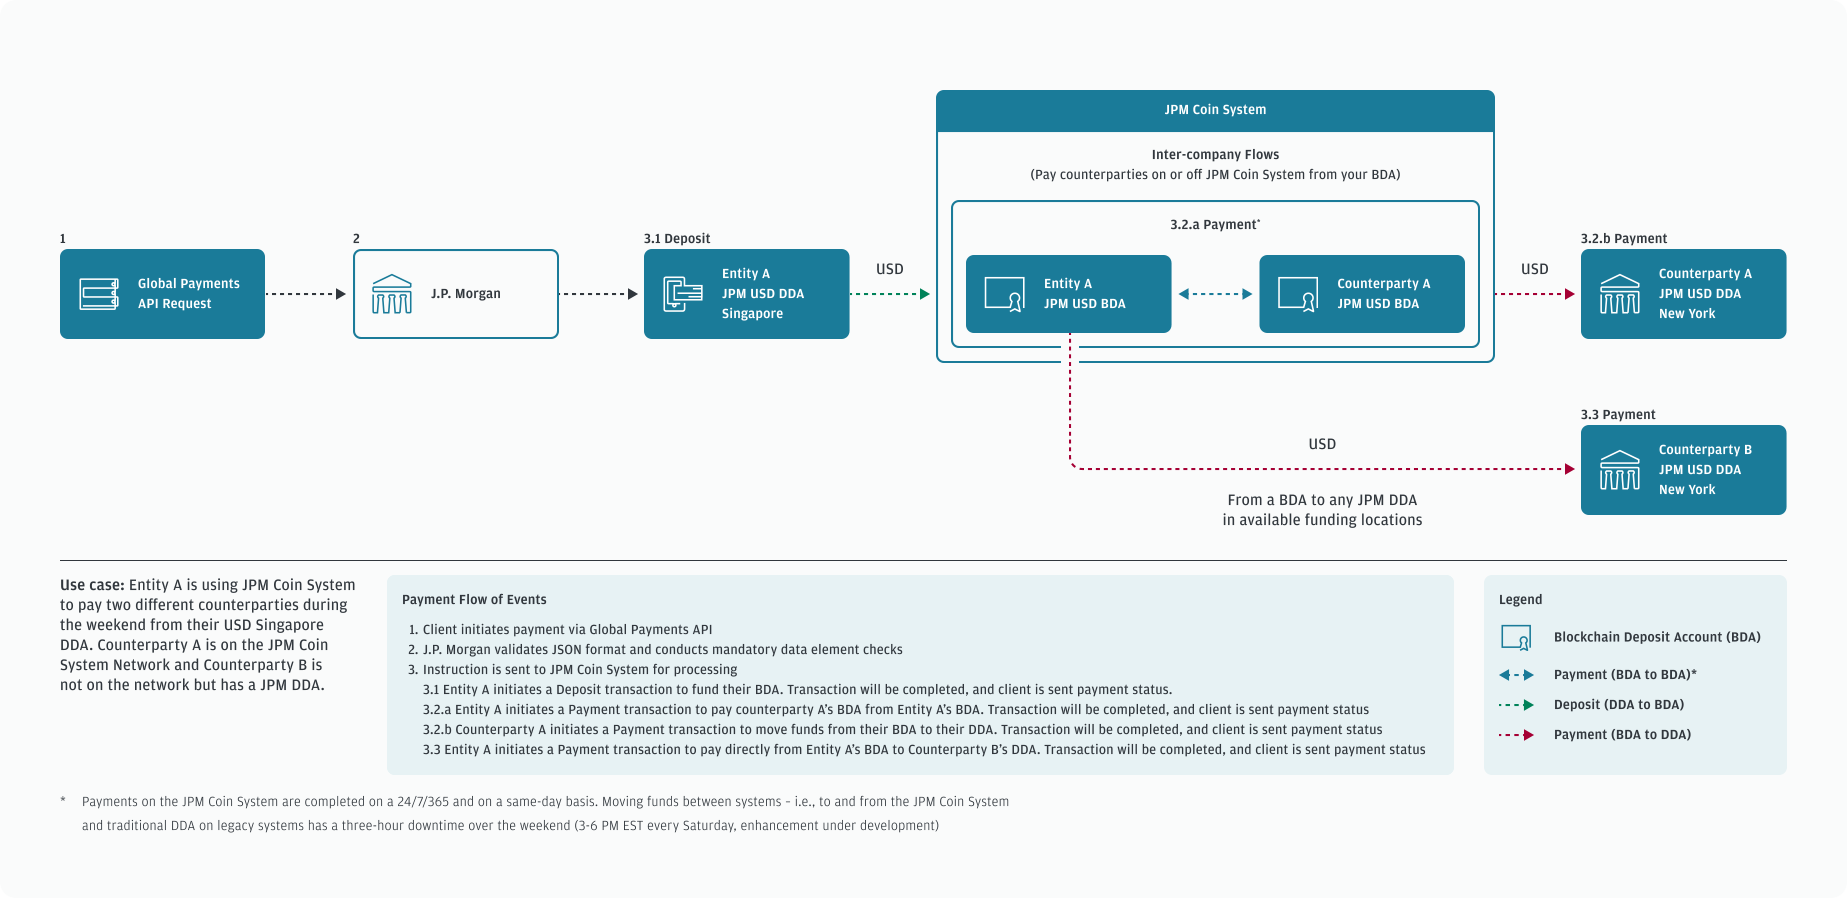 The JPM Coin Systems inter-company fund flow use case.